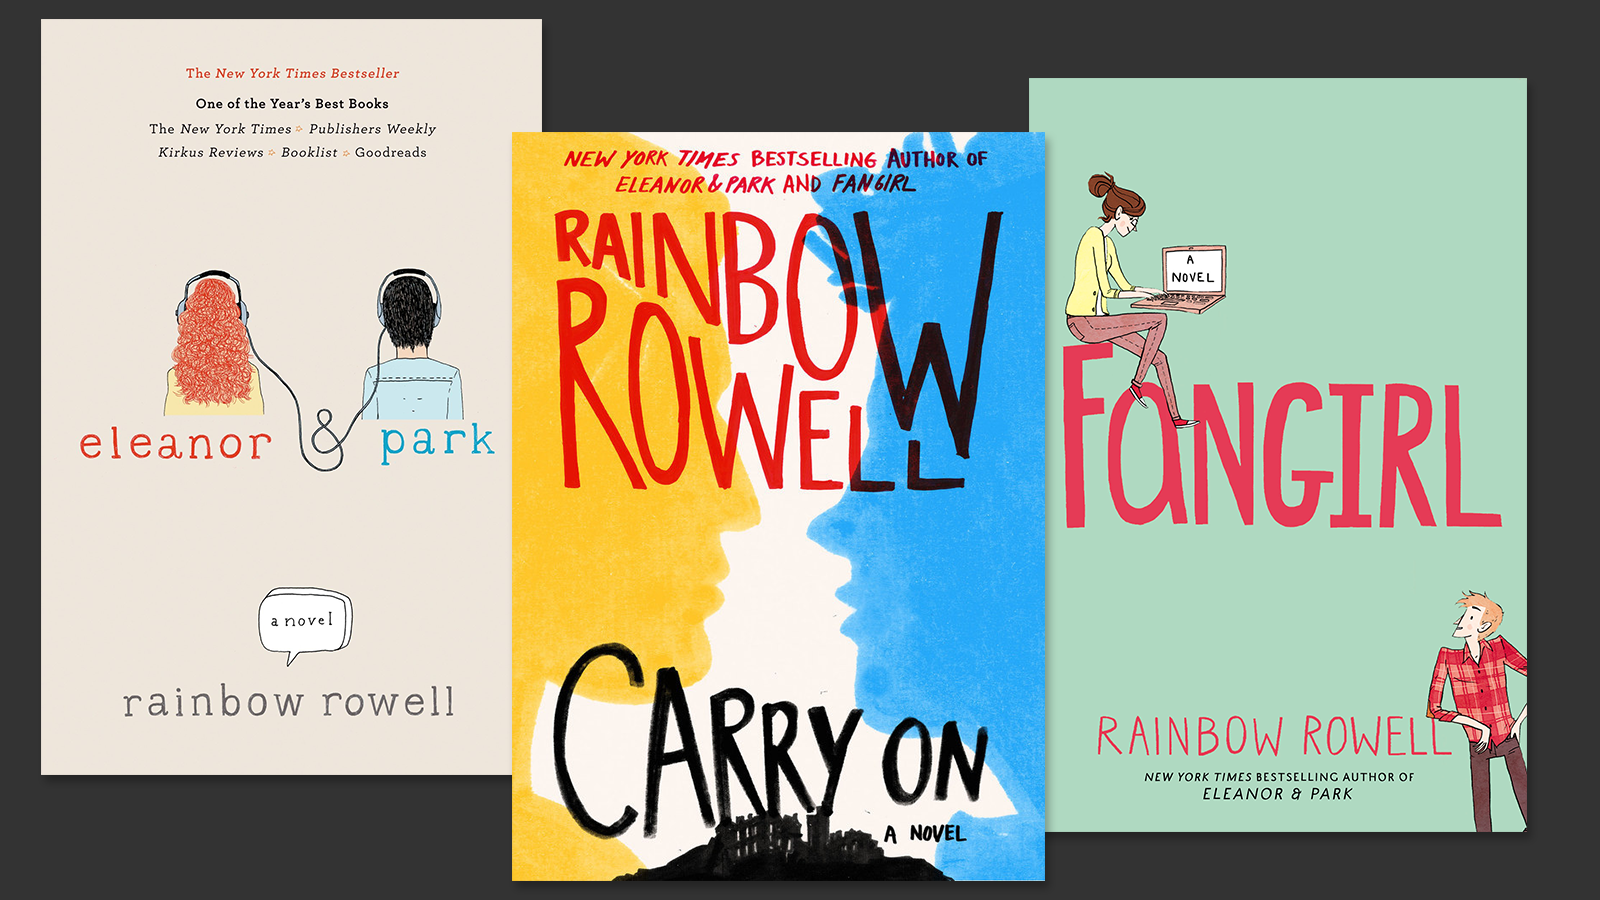 Covers of Rainbow Rowell's novels ELEANOR & PARK, CARRY ON, and FANGIRL